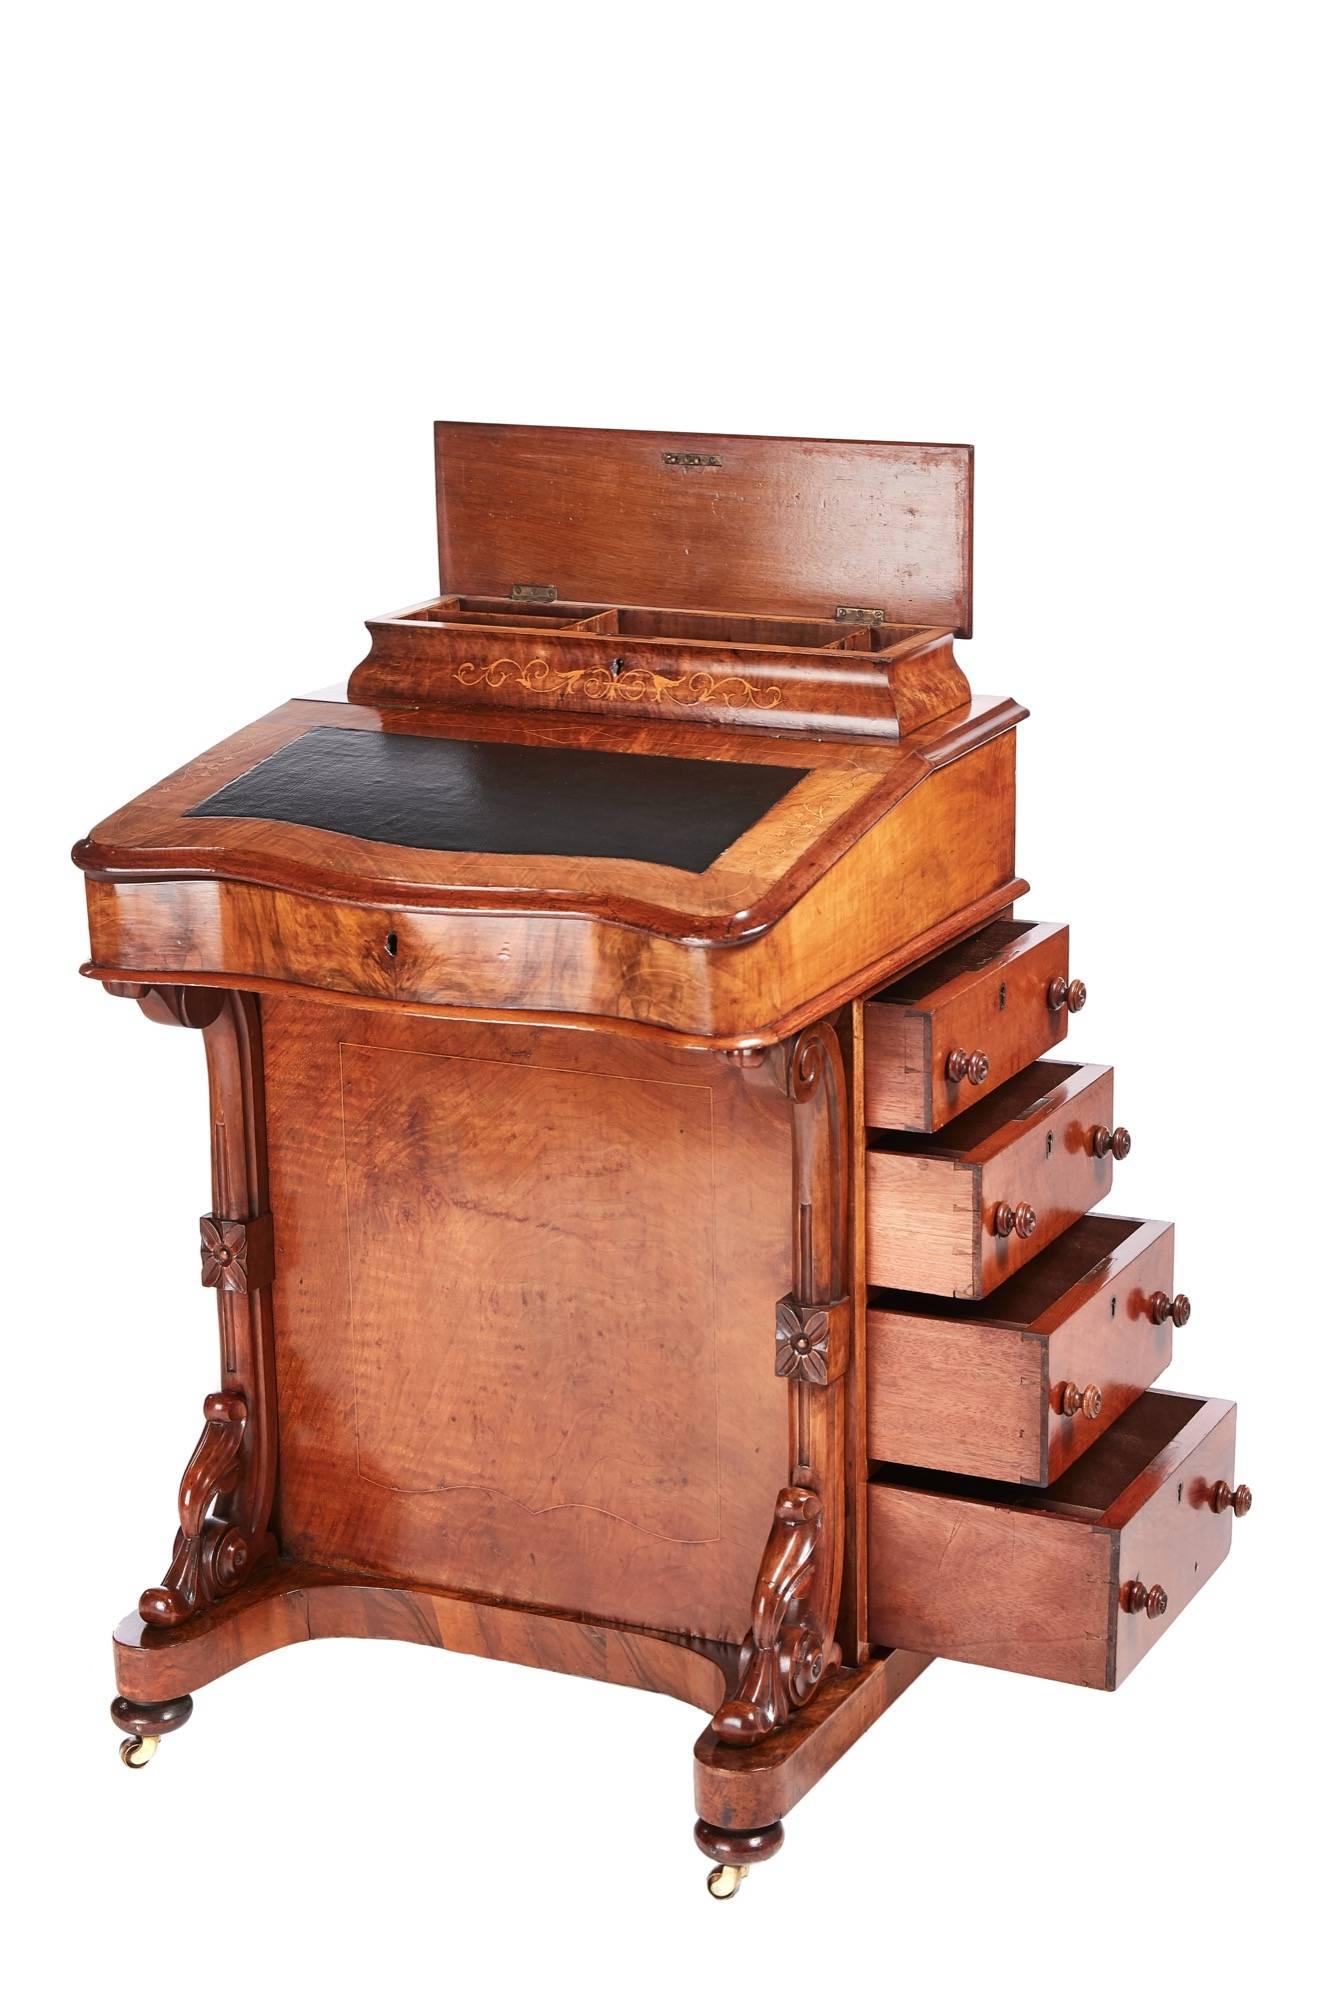 Victorian burr walnut inlaid Davenport, lift up lid with fitted interior, serpentine front, carved supports to the front, the right hand side has four drawers with original knobs, the left side has four false drawers with original knobs, standing on